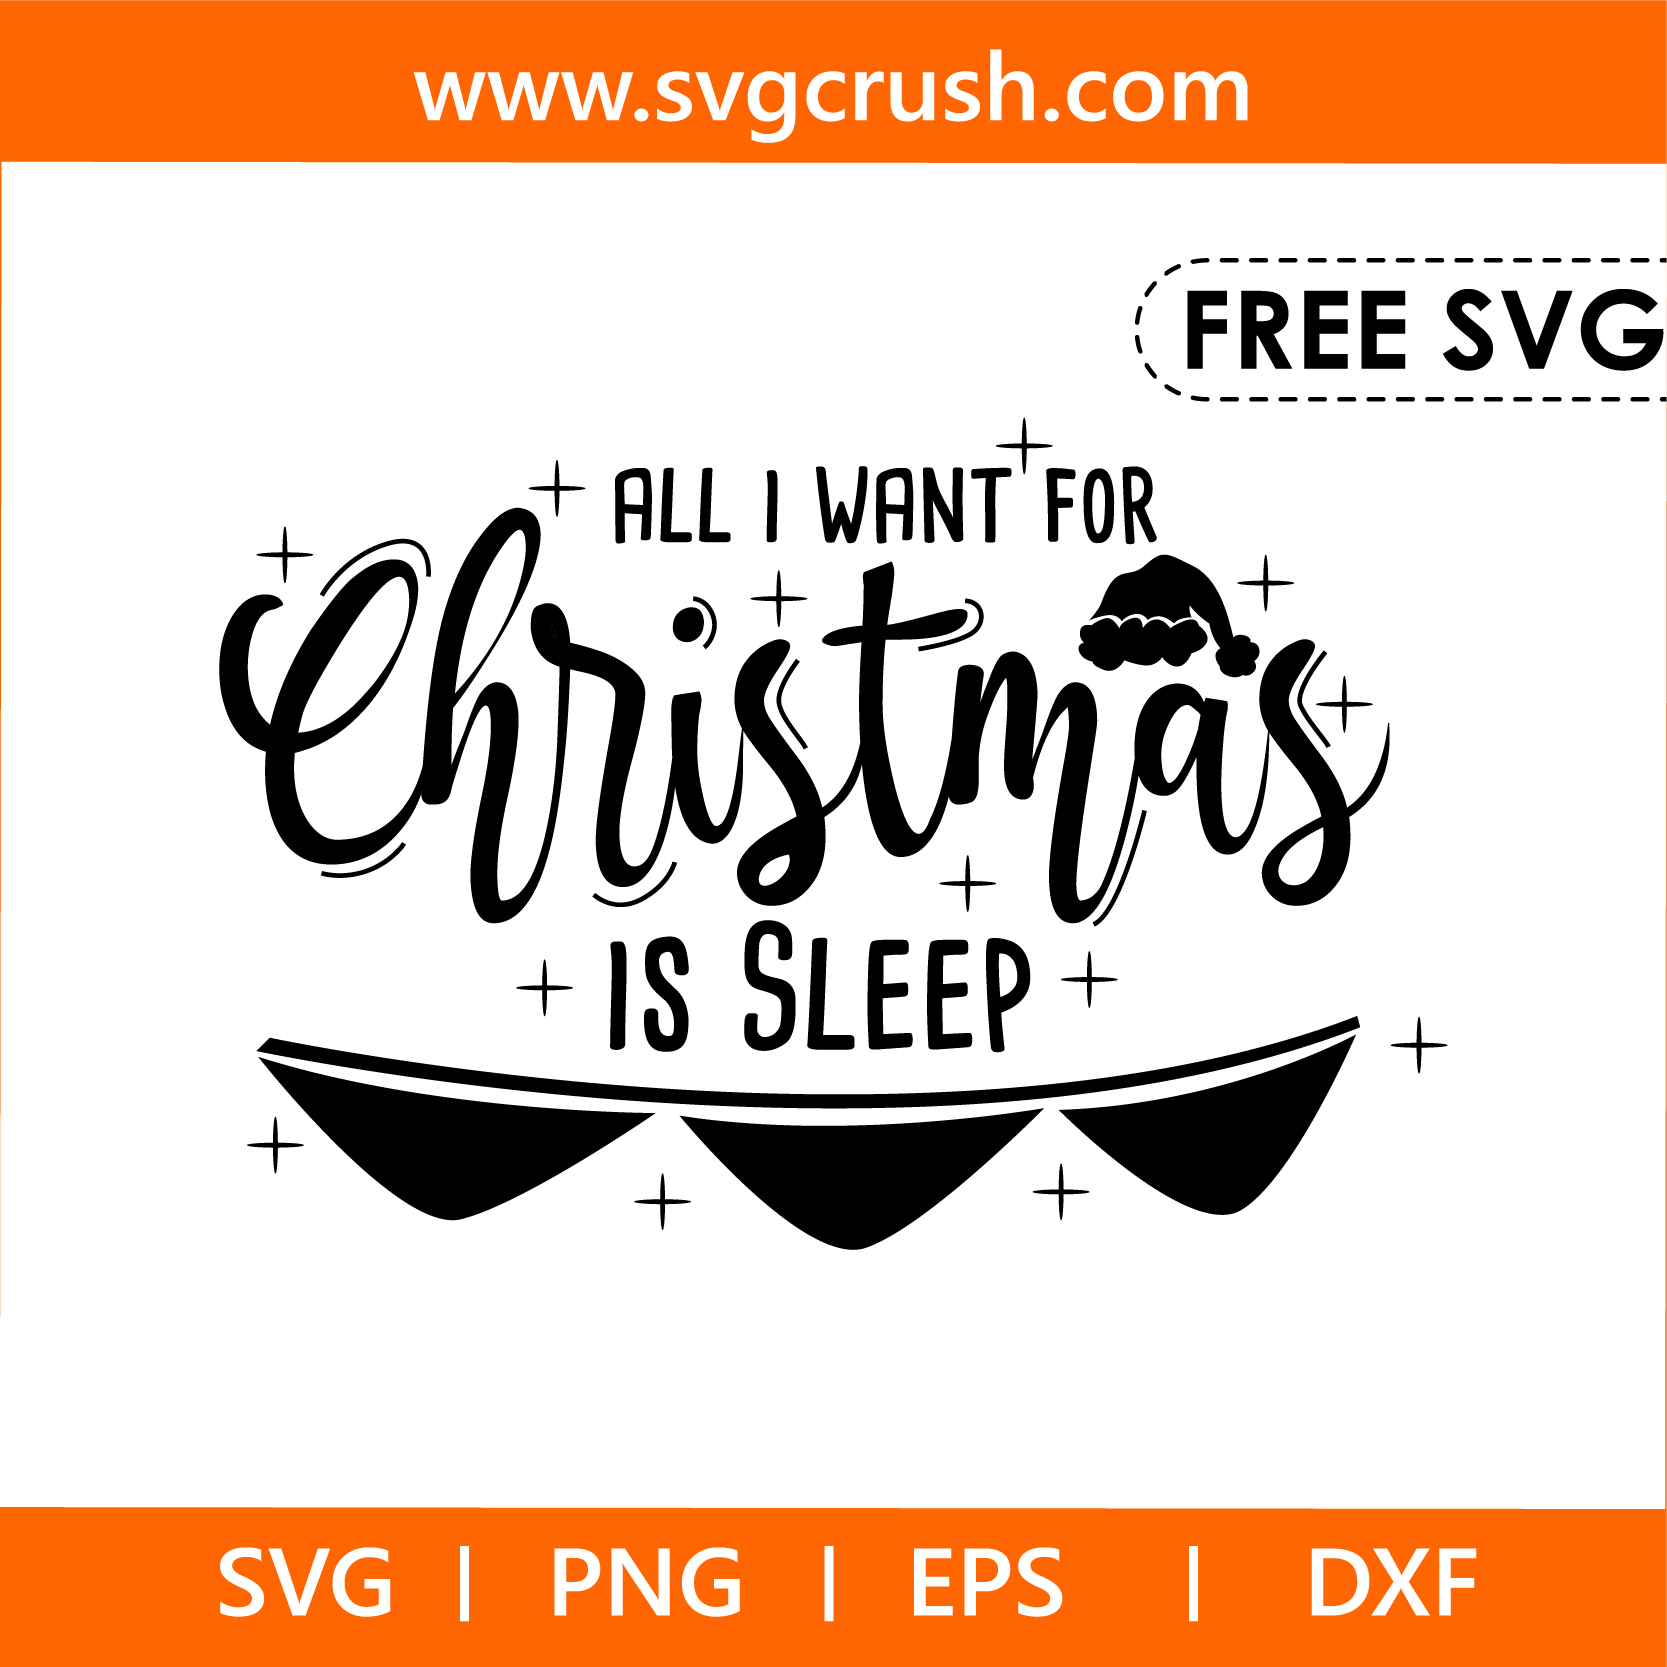 free all-i-want-for-chirstmas-is-sleep-004 svg